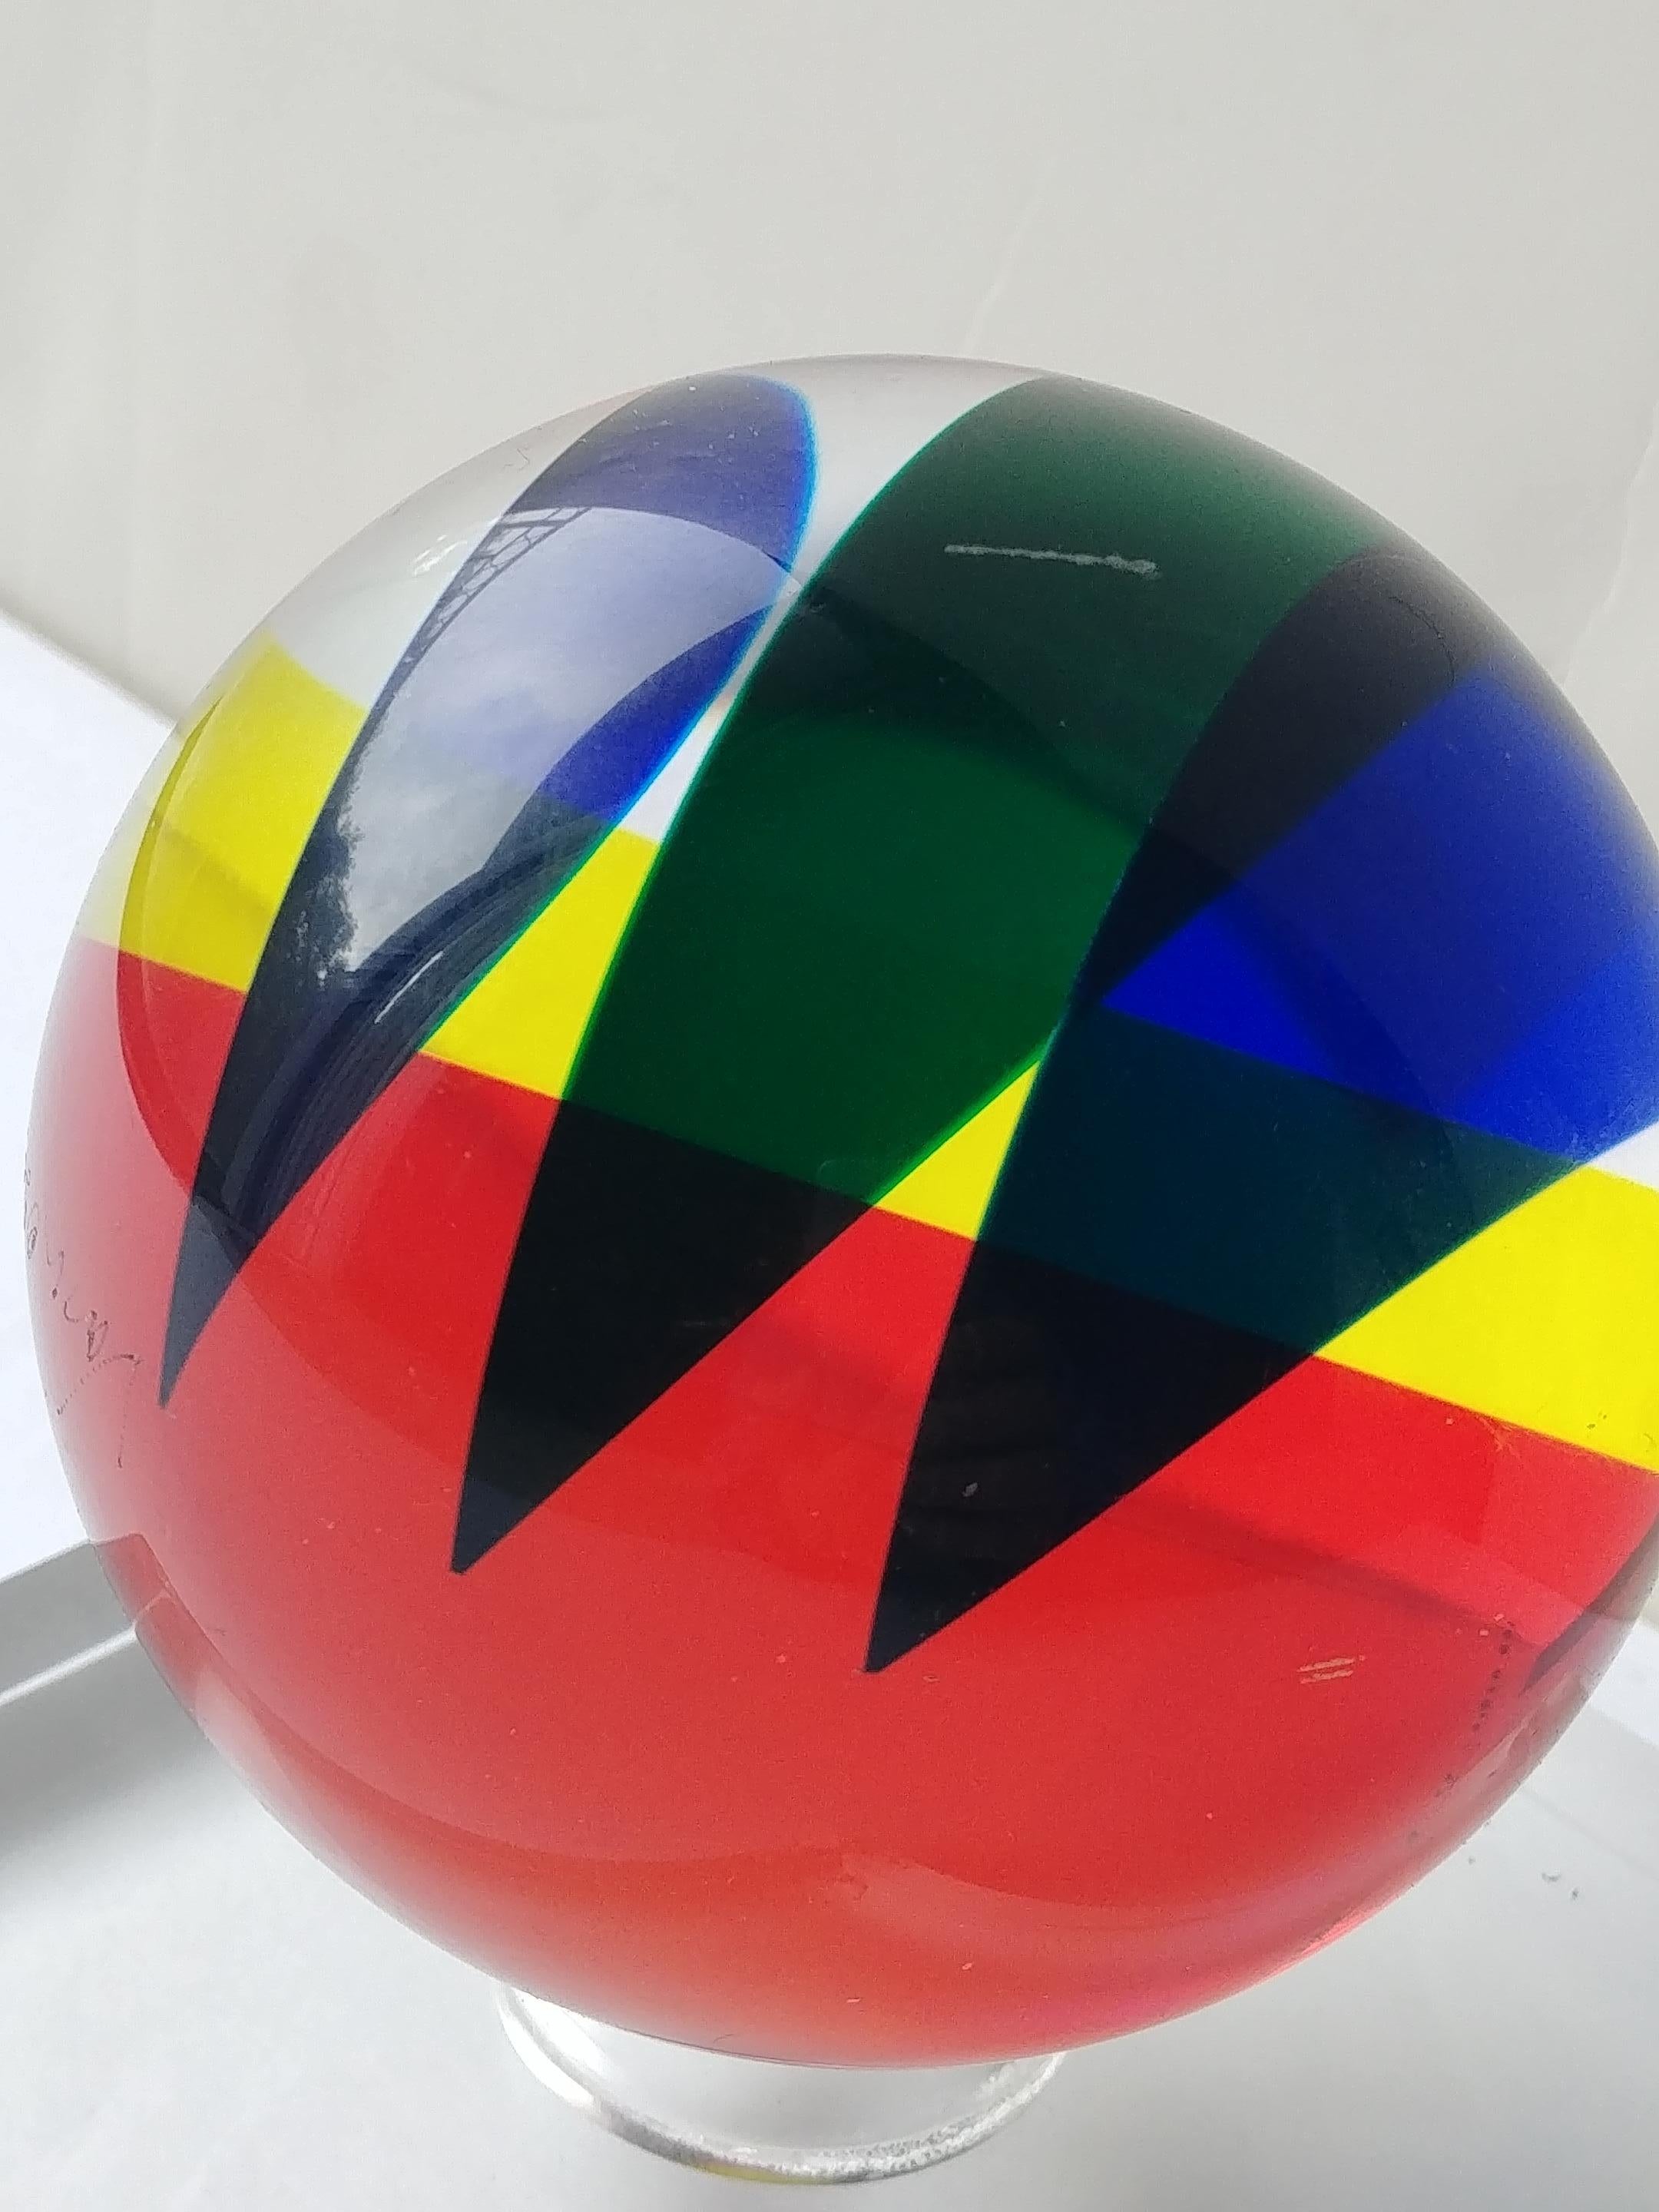 Very nice multicolored acrylic ball, by the well-known artist Vasa, signed and date 2001. As shown in pictures. Has a custom acrylic base 5 inches square and approximate 1